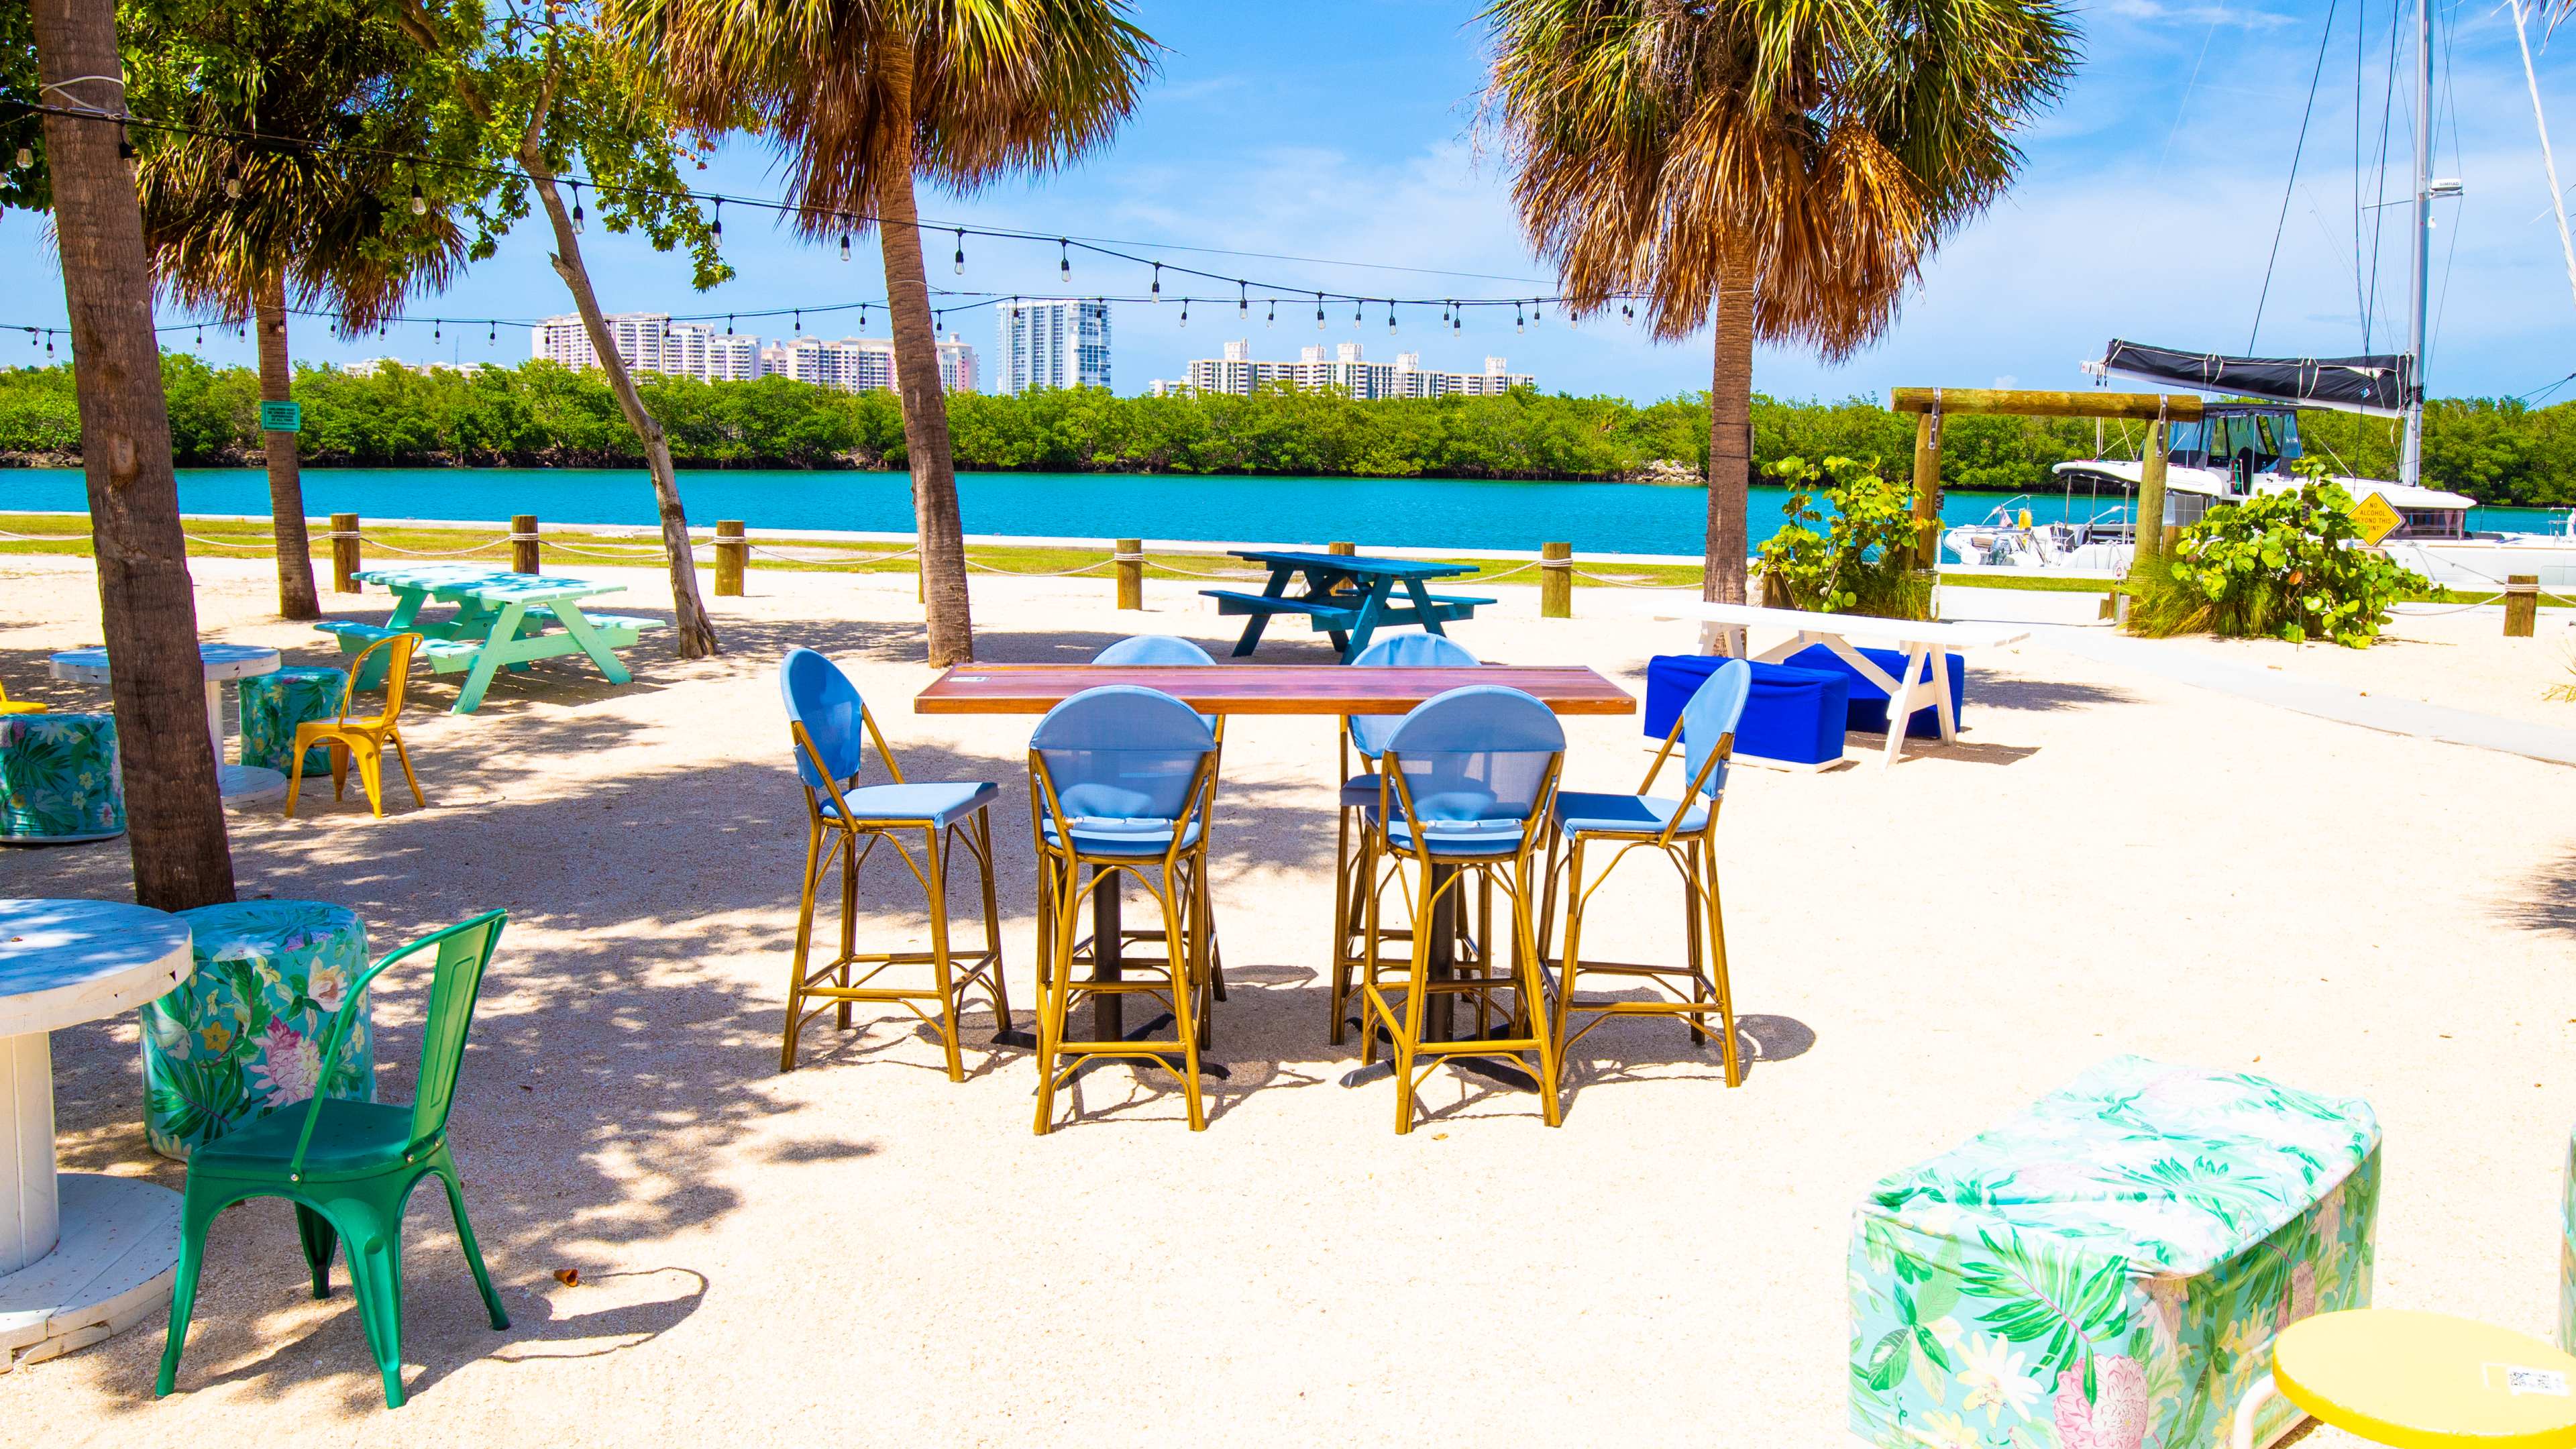 Beach patio with colorful tables and bar stools on the sand.